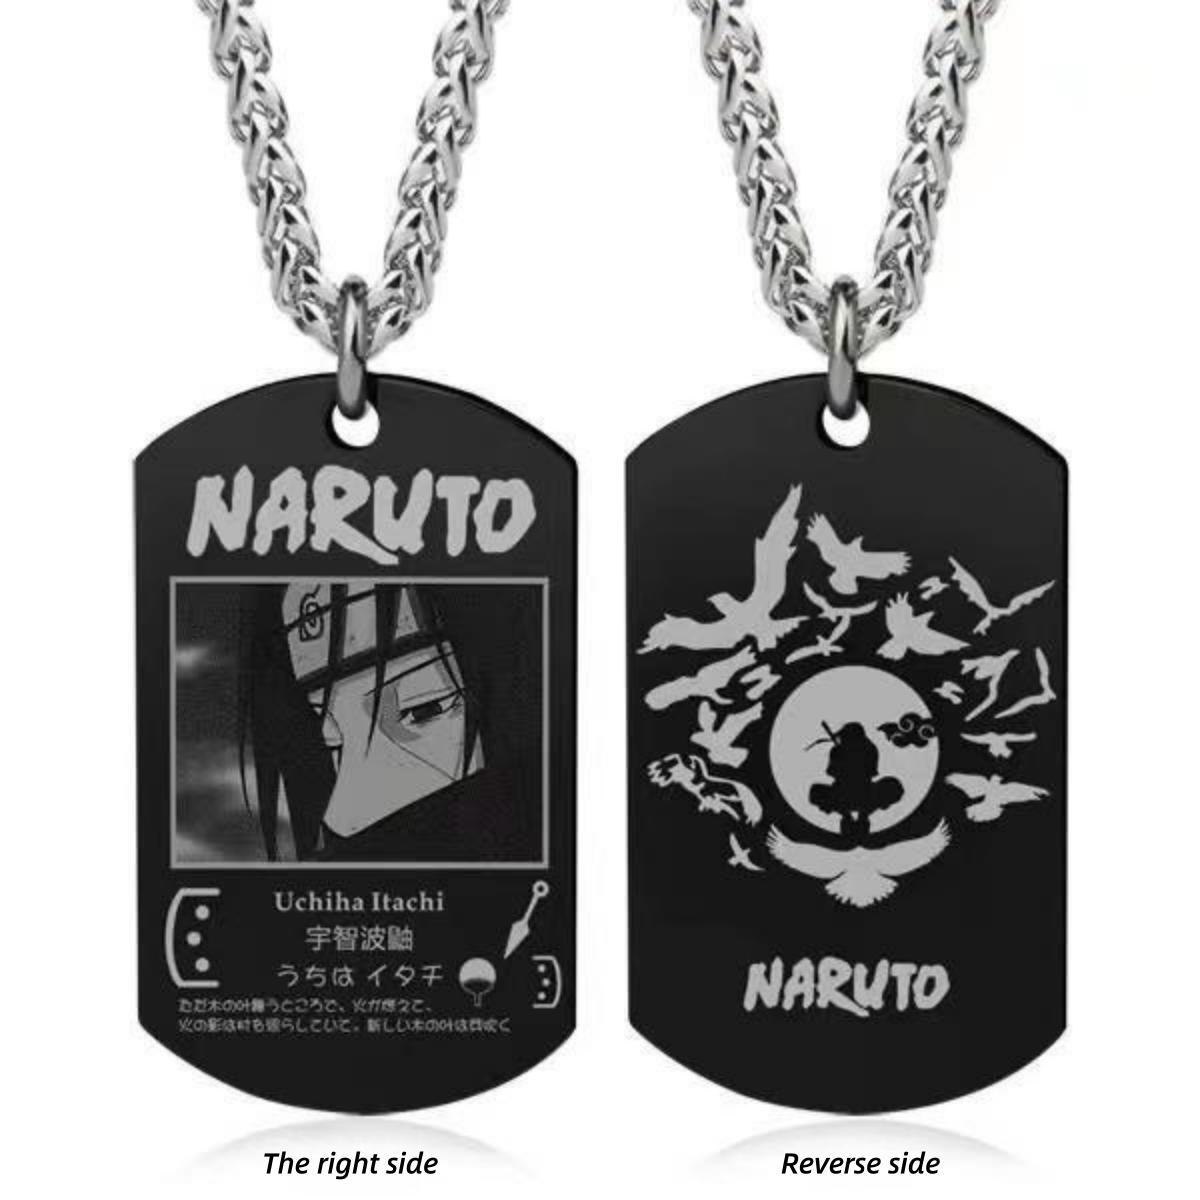 Ninja style handsome necklace, for your wear with a more sophisticated match.